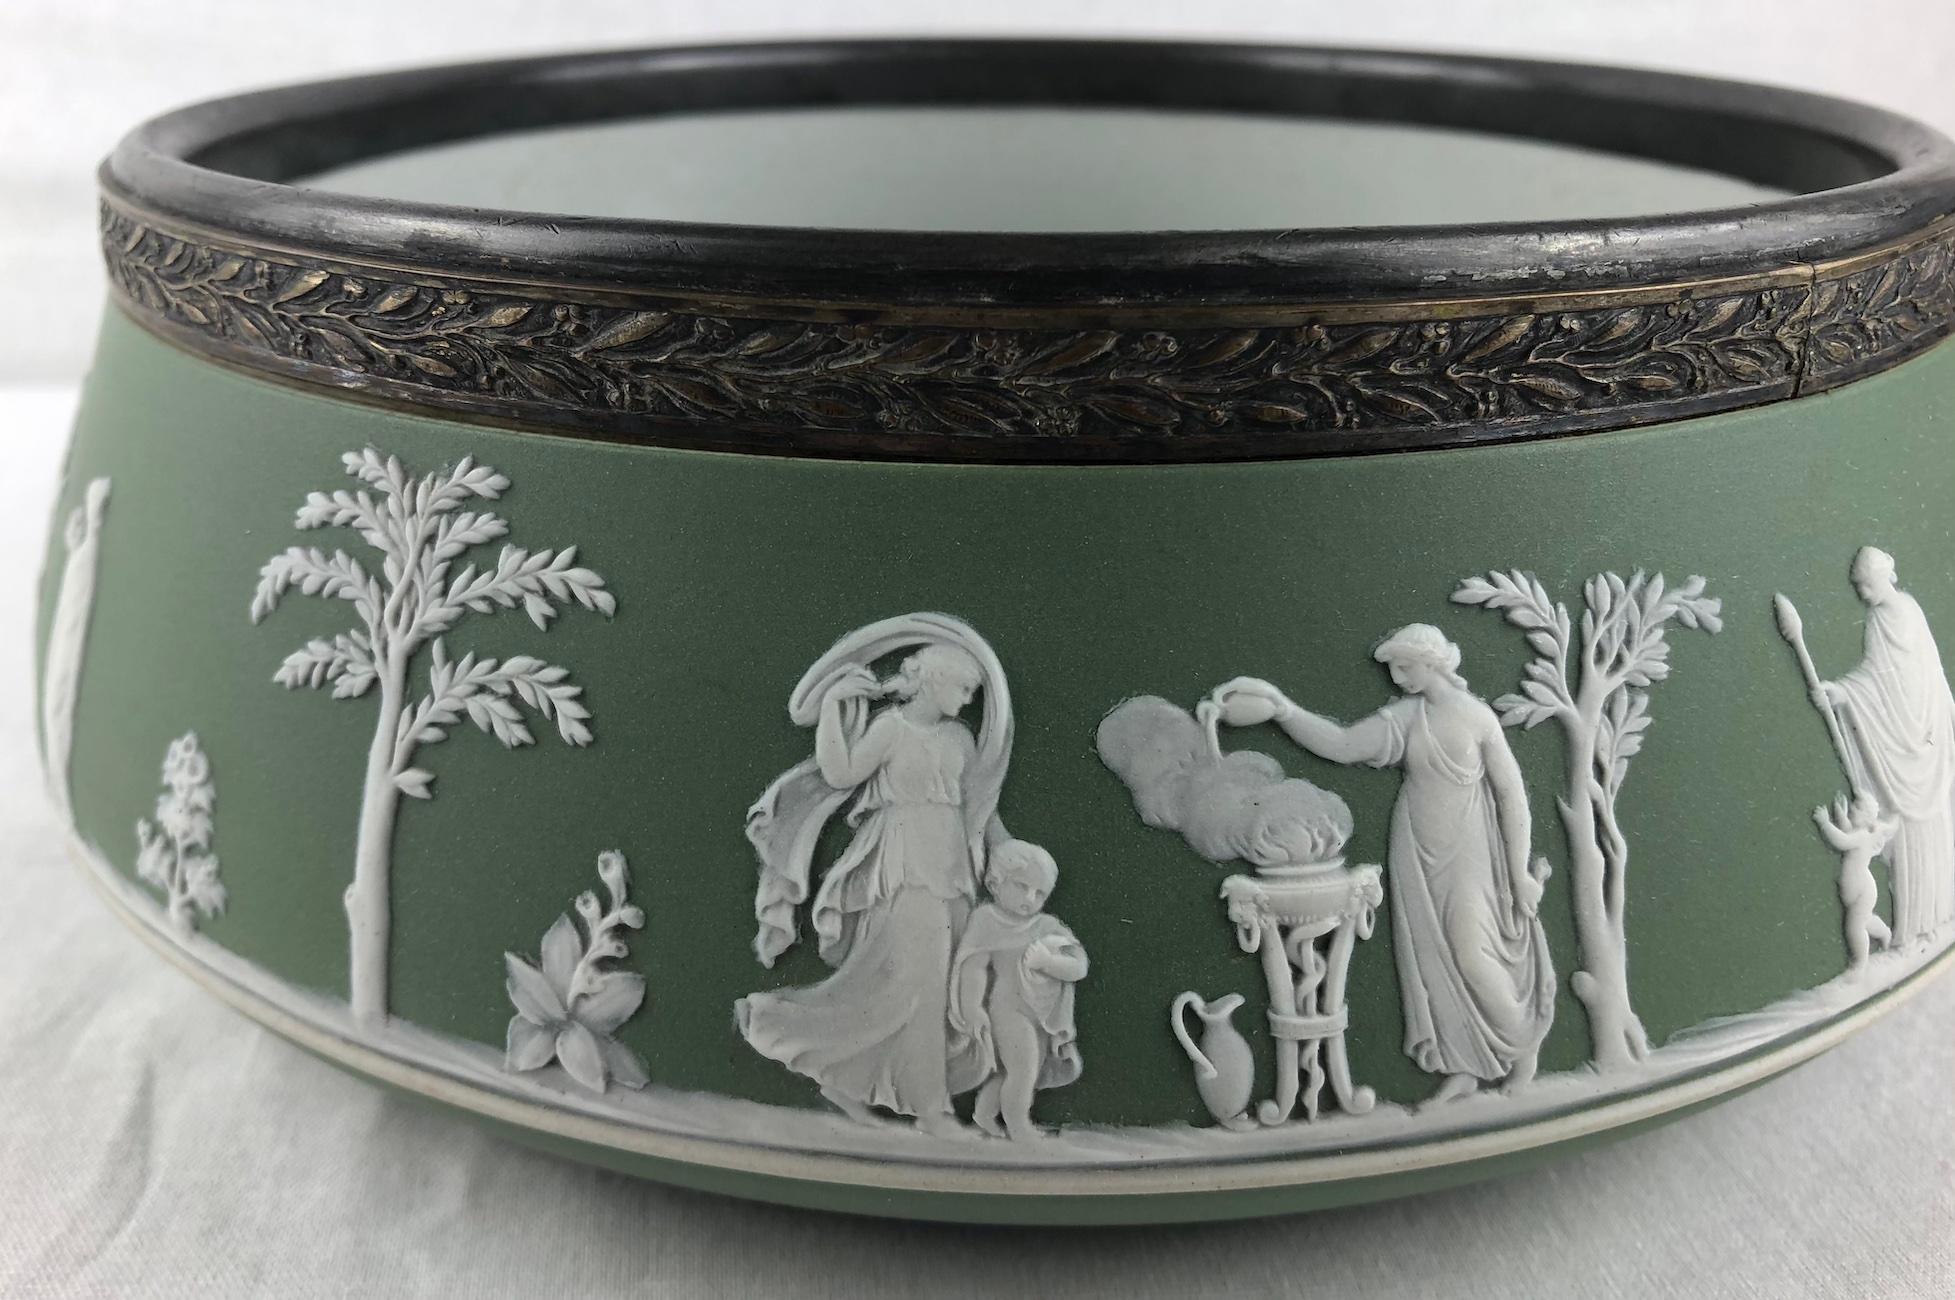 Large Collectible English Wedgwood Jasperware Pale Green Chariot Bowl In Good Condition For Sale In Miami, FL